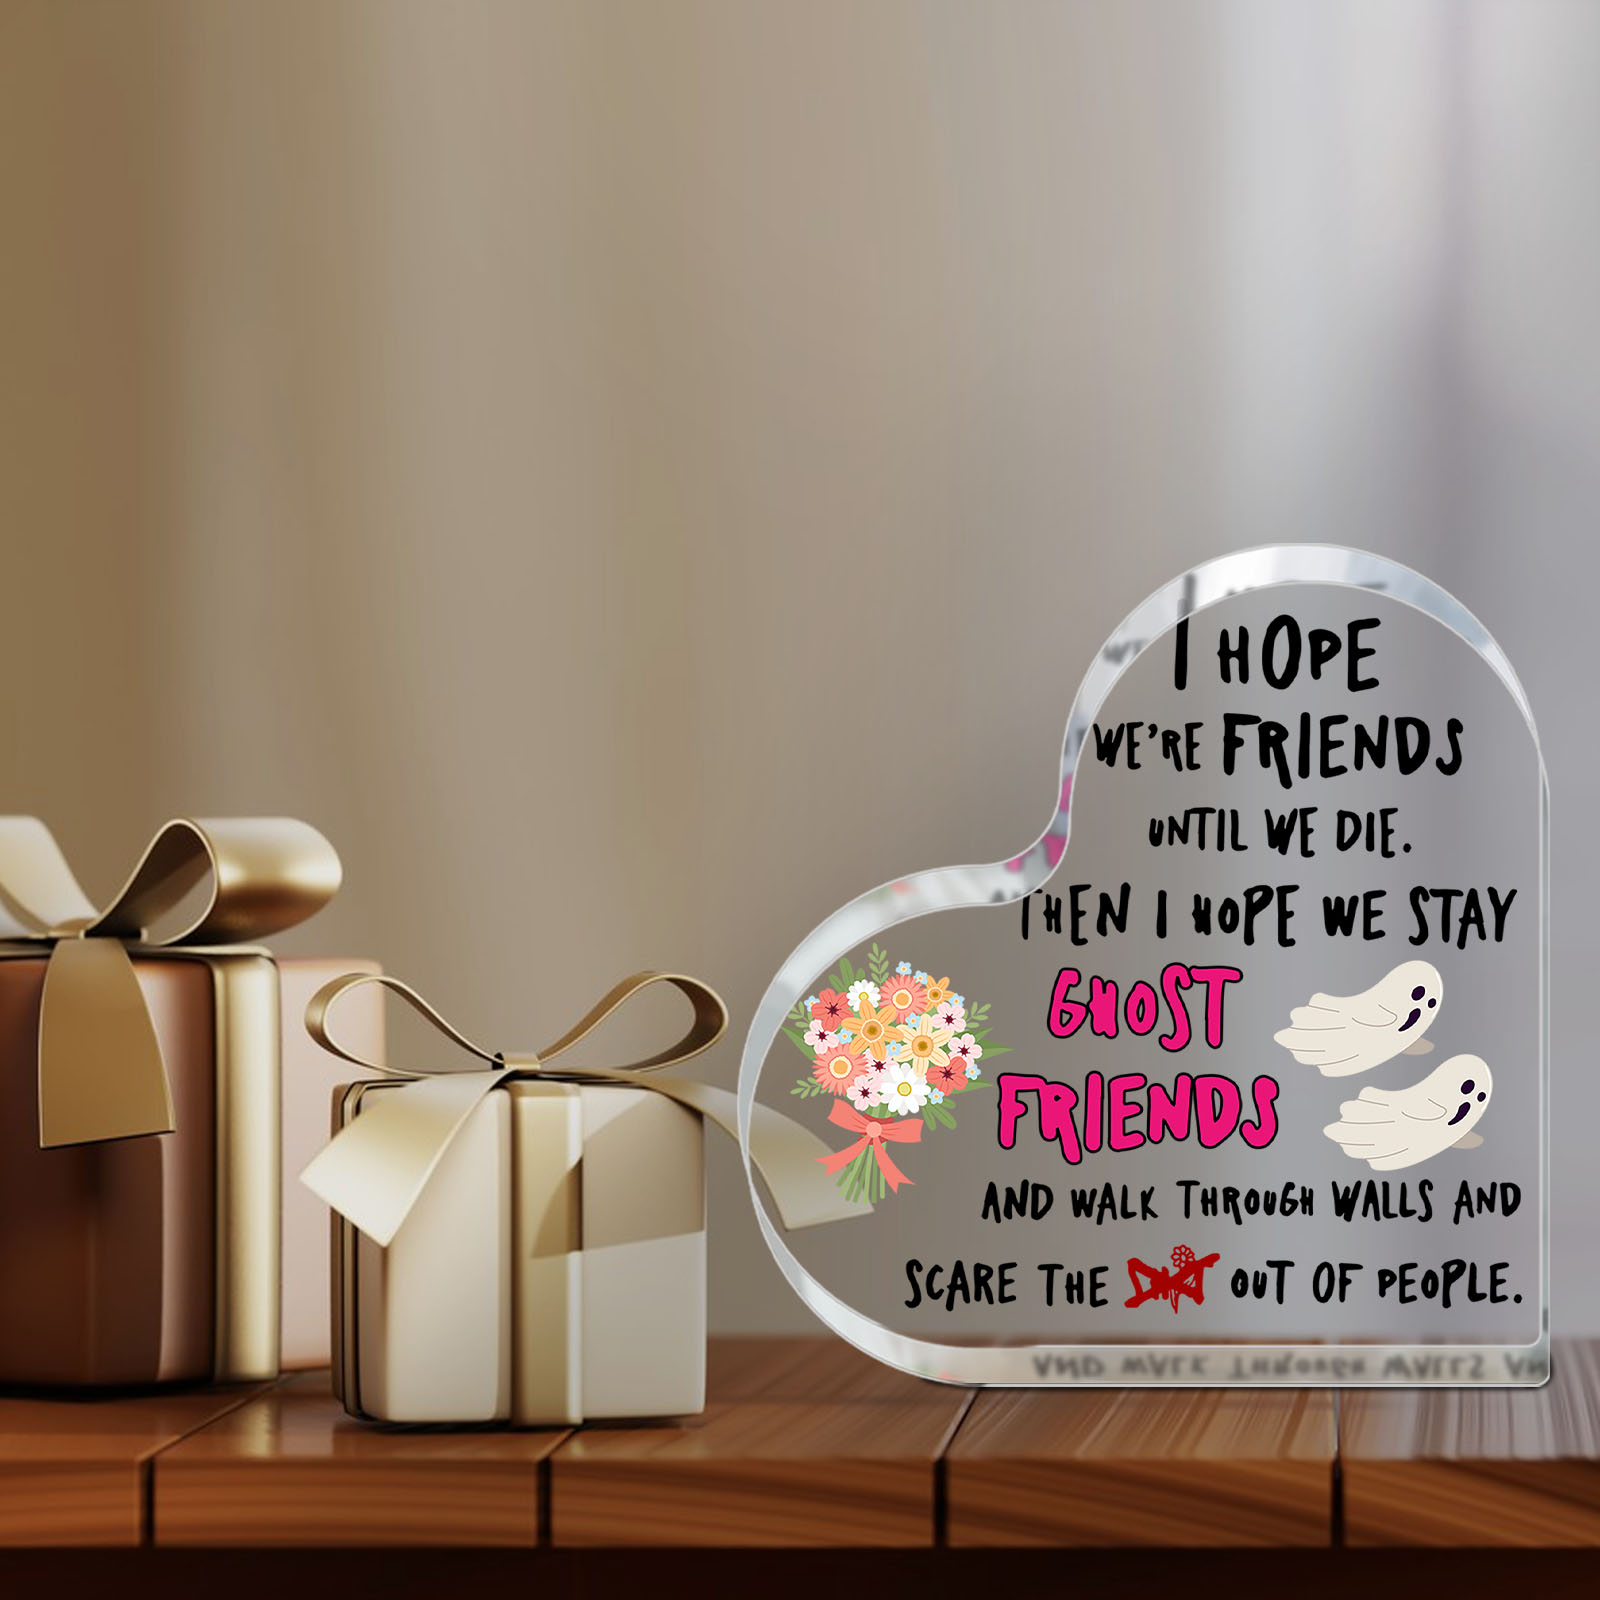 Best Friend Birthday Gifts for Women, Birthday Gifts for Friends Female,  Friendship Gifts for Women BFF Bestie Sister Gifts from Sister, Funny